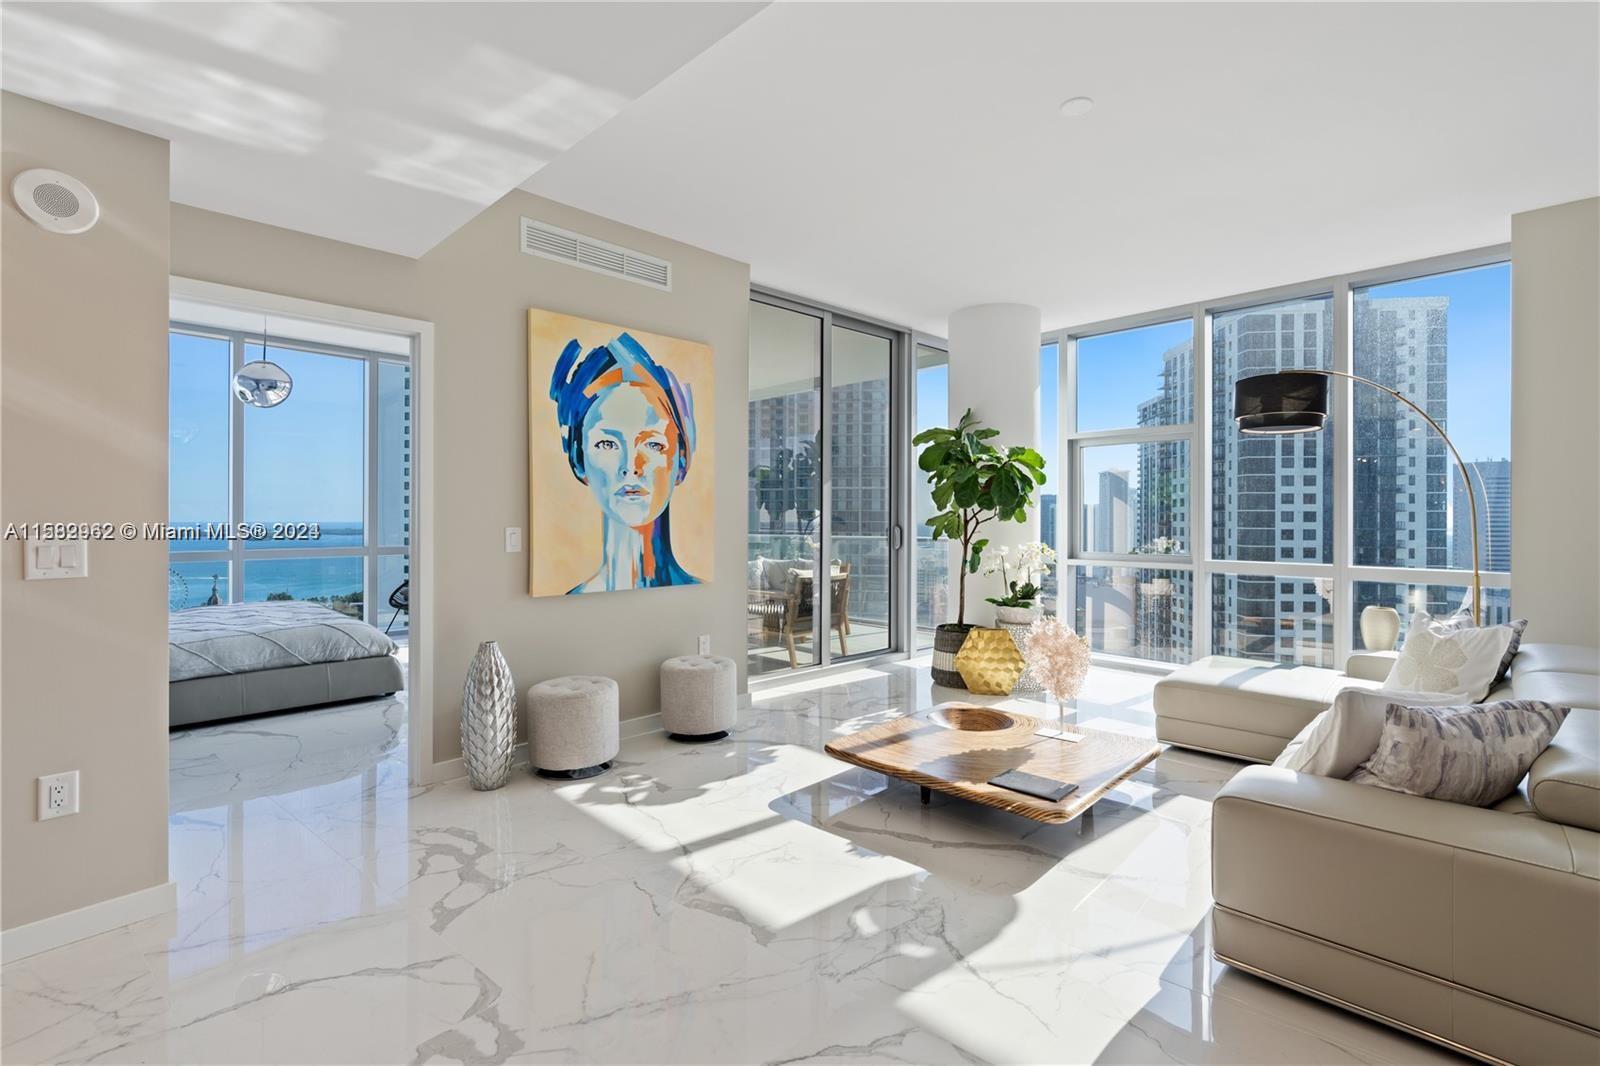 Introducing Unit 2911 at Paramount Miami Worldcenter. Look no further, Unit 2911 offers the Best Line in the building and Most Desirable 3 Bed Floor Plan with Direct Bay Views from every room. No expense spared, with Over $250,000 worth of designer upgrades have been made throughout such as: Italian porcelain floors throughout, stylish wall paper, and more. Top of the Line Finishes and Furnishing. As you step out of your own private elevator, you are welcomed by a stunning private foyer. 
Live in one of the Most sought out buildings, in a rapidly growing area of Miami Worldcenter with tons of new activities, lifestyle, and businesses coming to the area such as: Apple Store, Padel X, fine dining and shopping, and more. Best Amenities in the World for a Residential Complex.